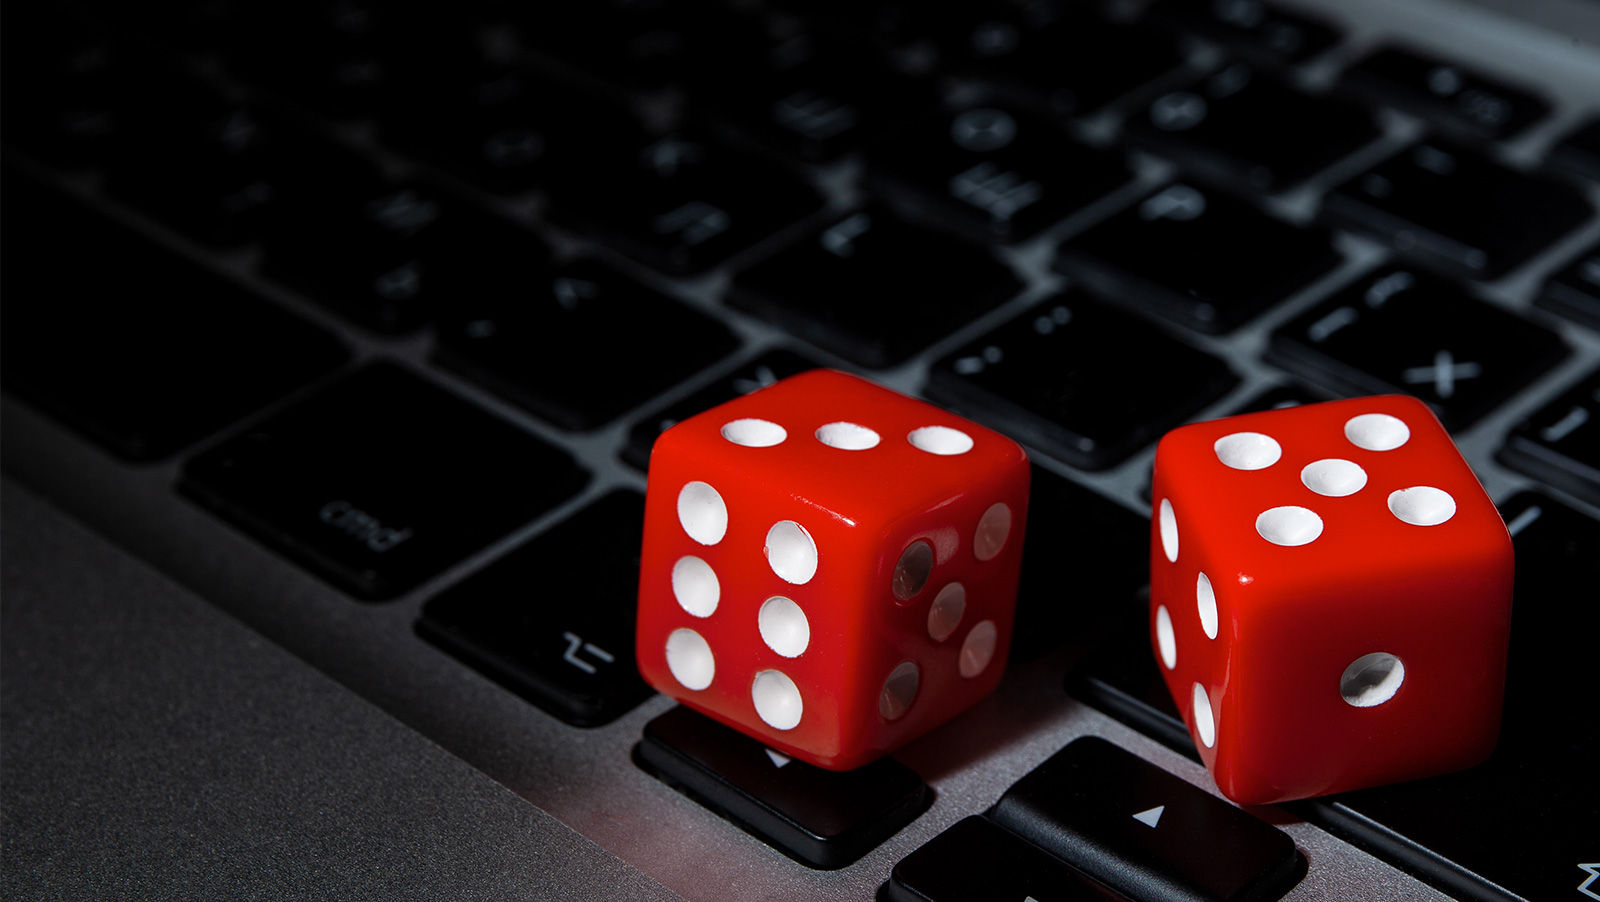 What are the tips to win online poker games?